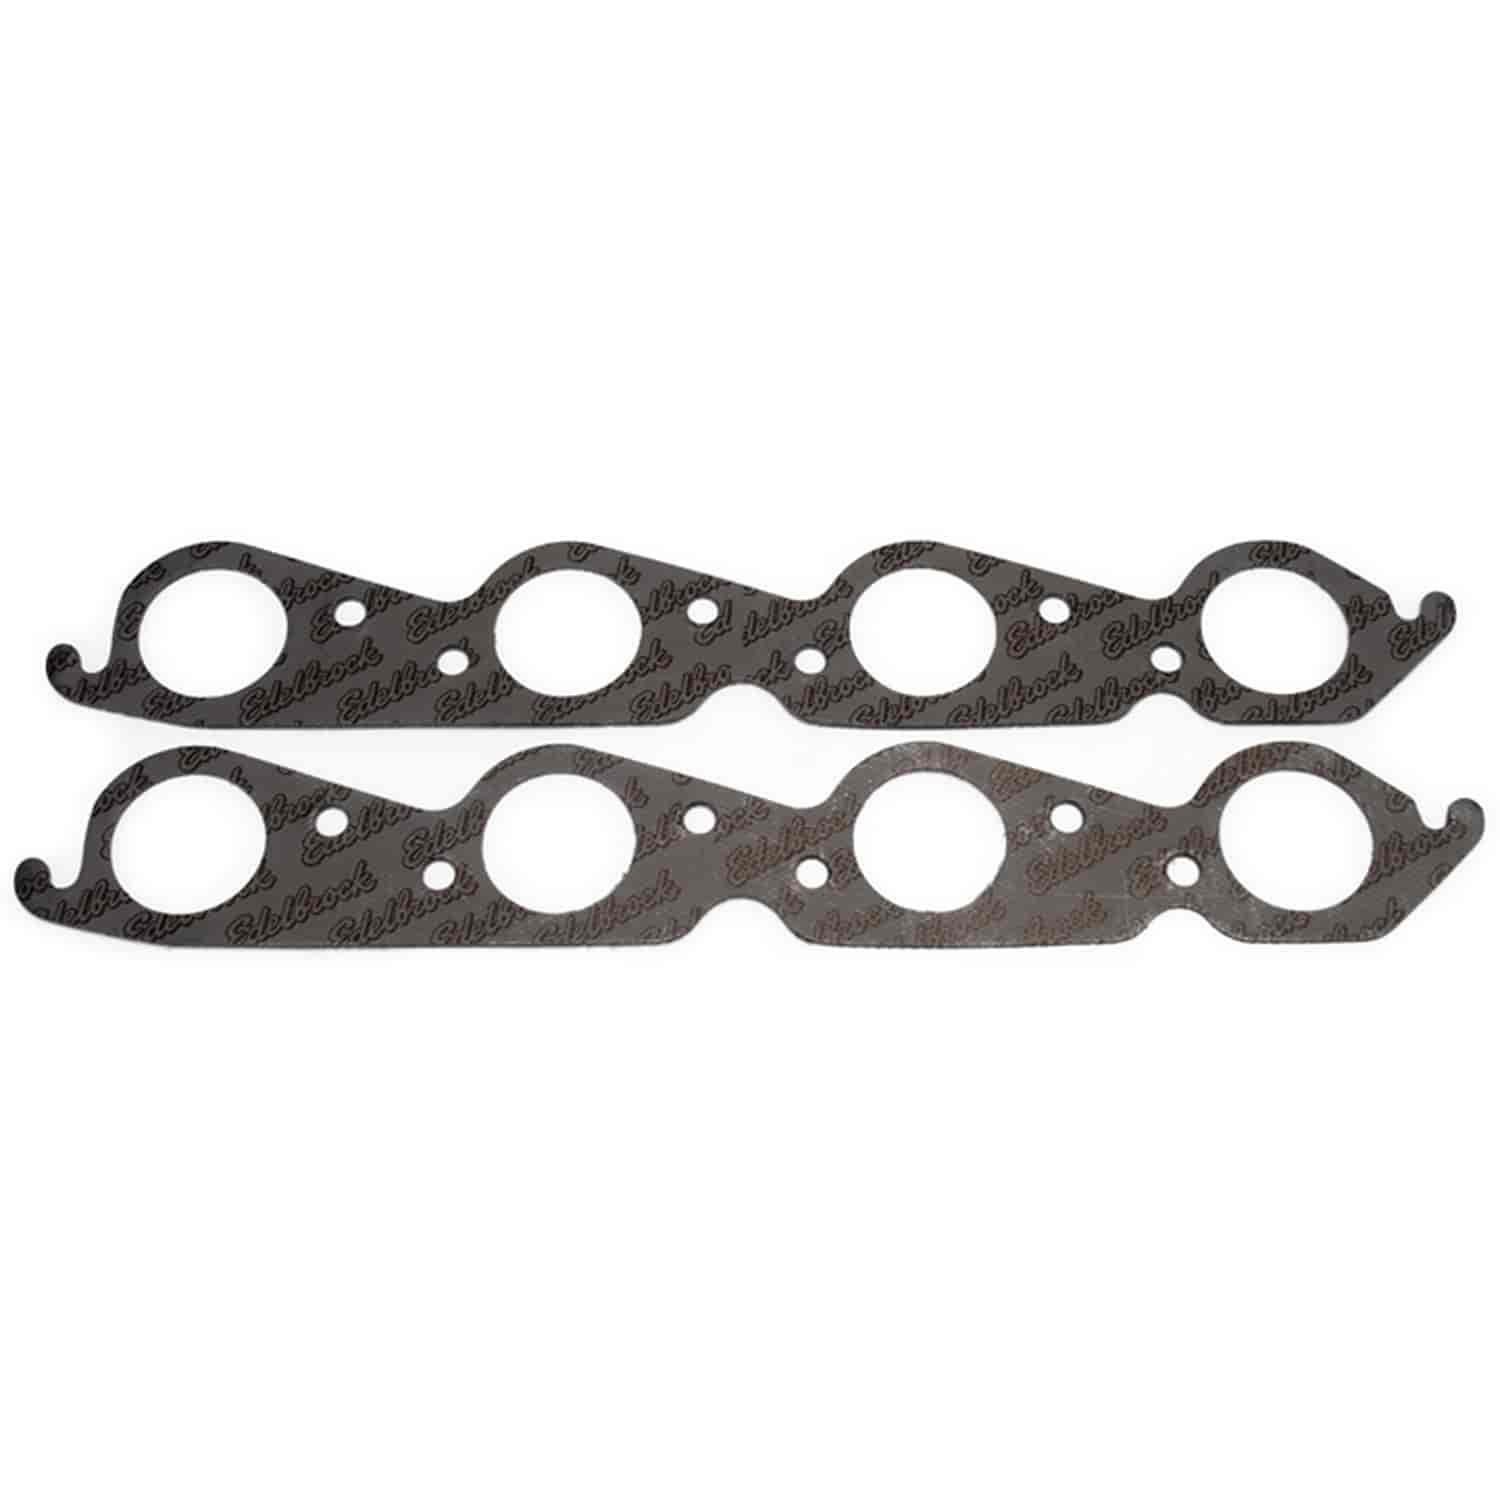 Exhaust Gaskets for Big Block Chevy